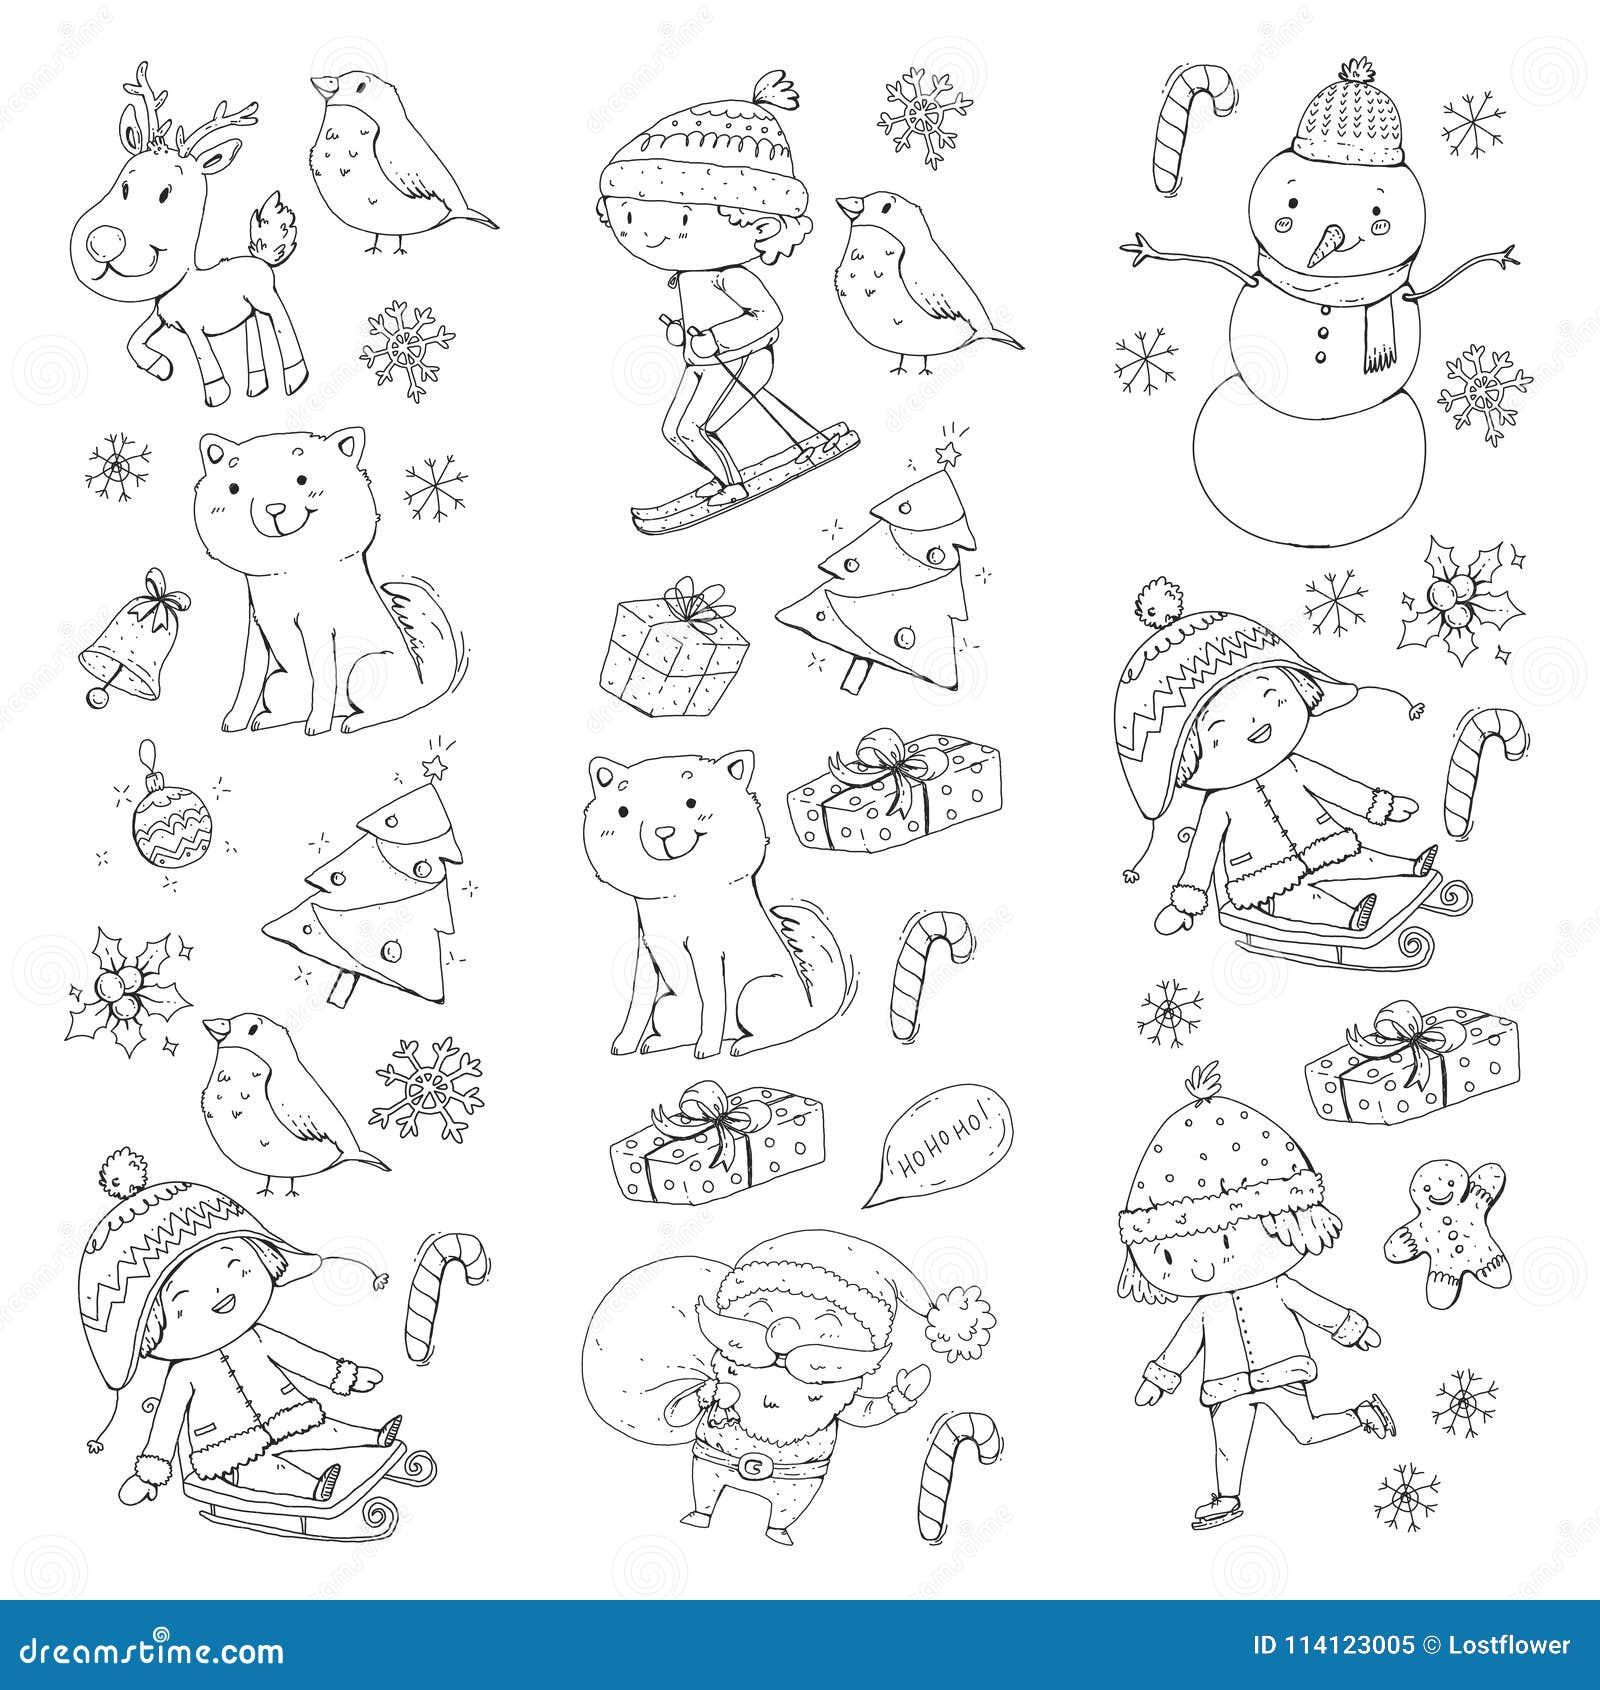 Merry Christmas celebration with children Kids drawing illustration with ski t Santa Claus snowman Boys and girls play and have fun